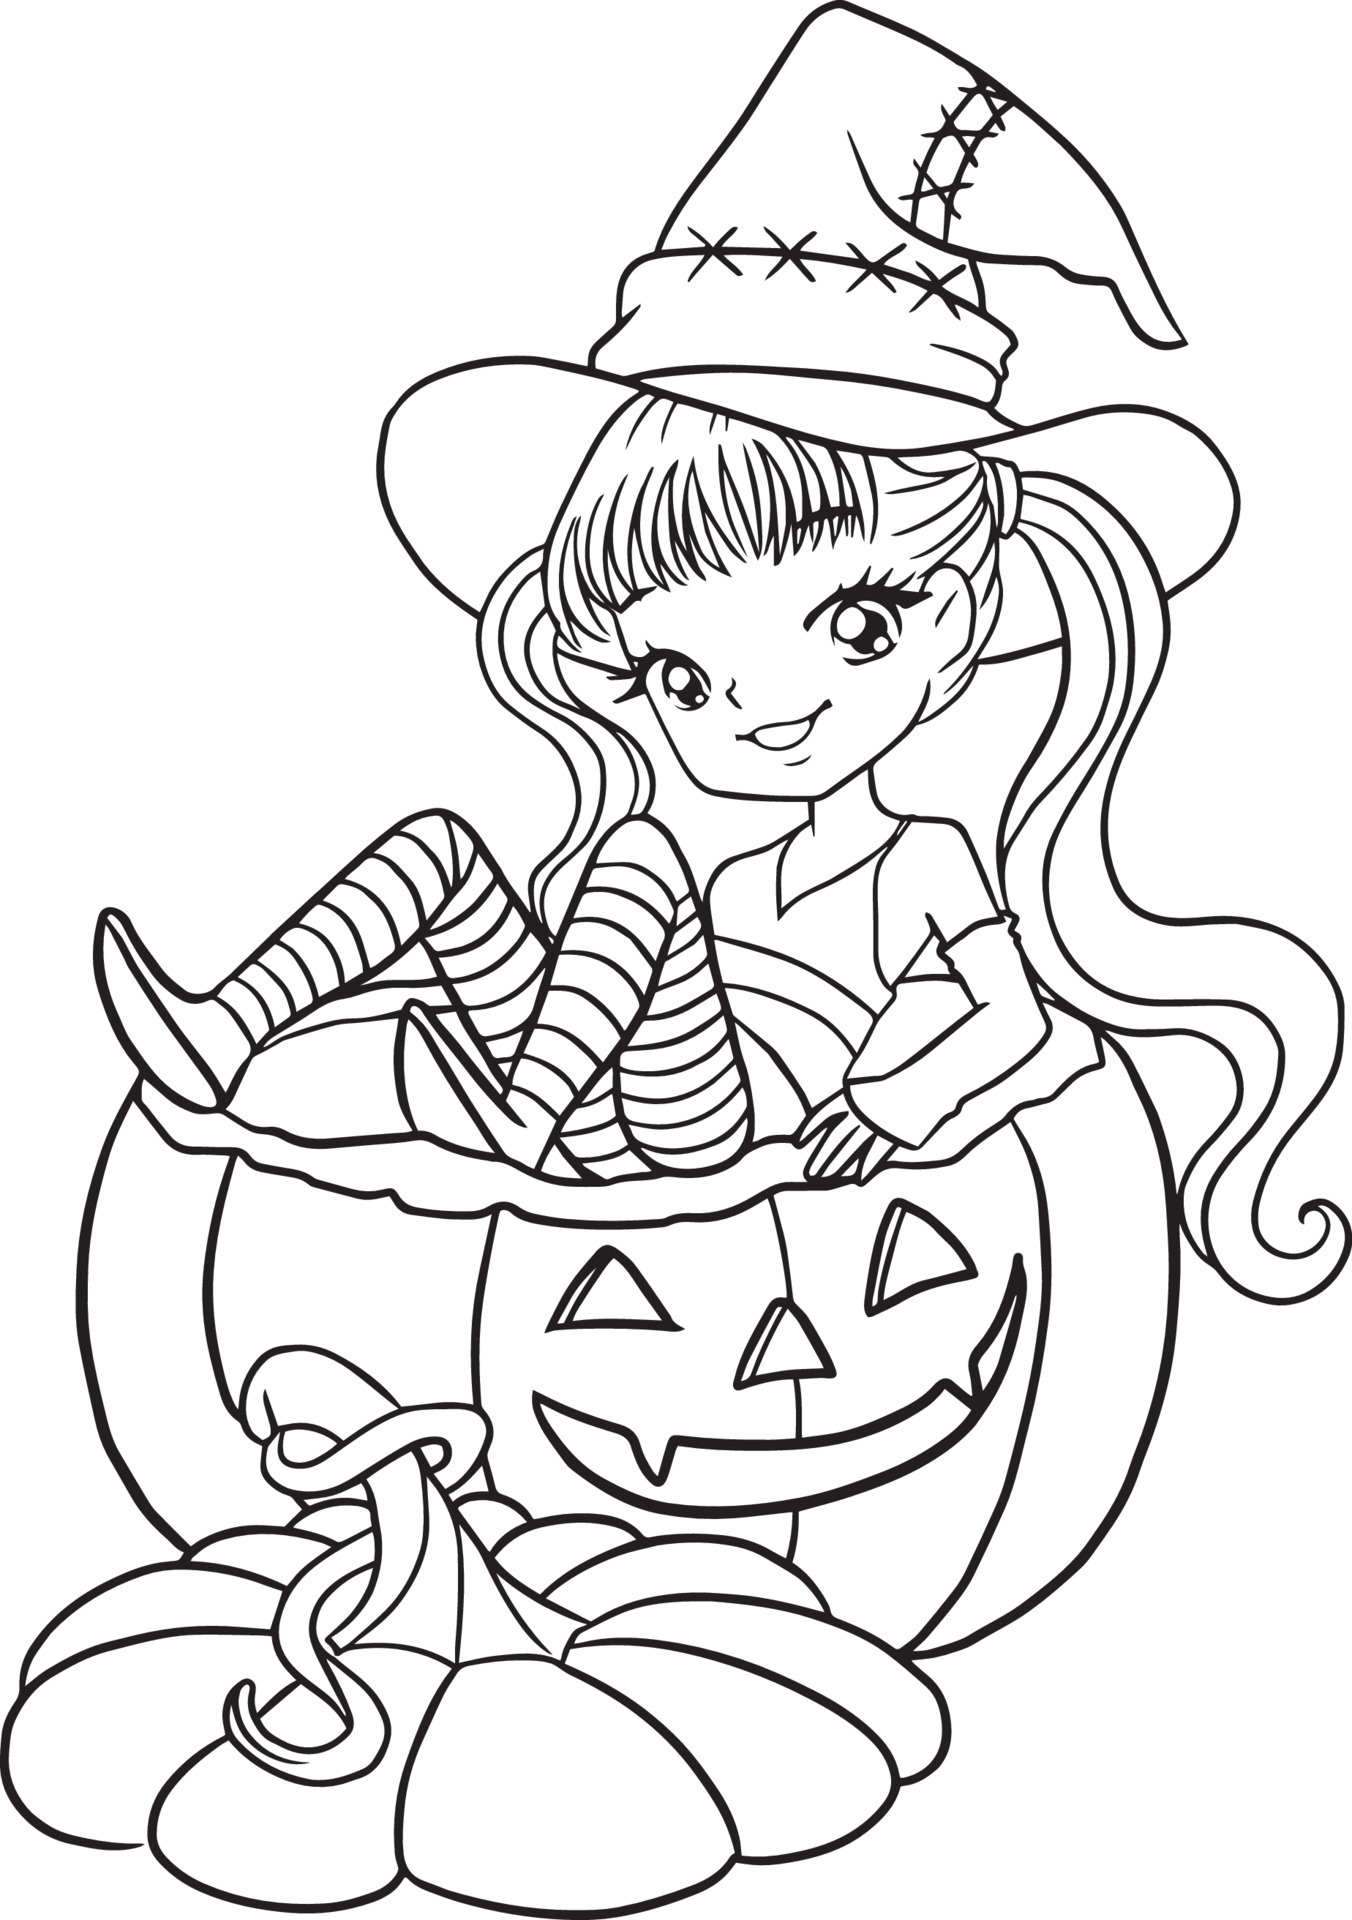 https://static.vecteezy.com/system/resources/previews/013/430/542/original/witch-girl-cartoon-doodle-kawaii-anime-coloring-page-cute-illustration-drawing-clipart-character-chibi-manga-comics-vector.jpg